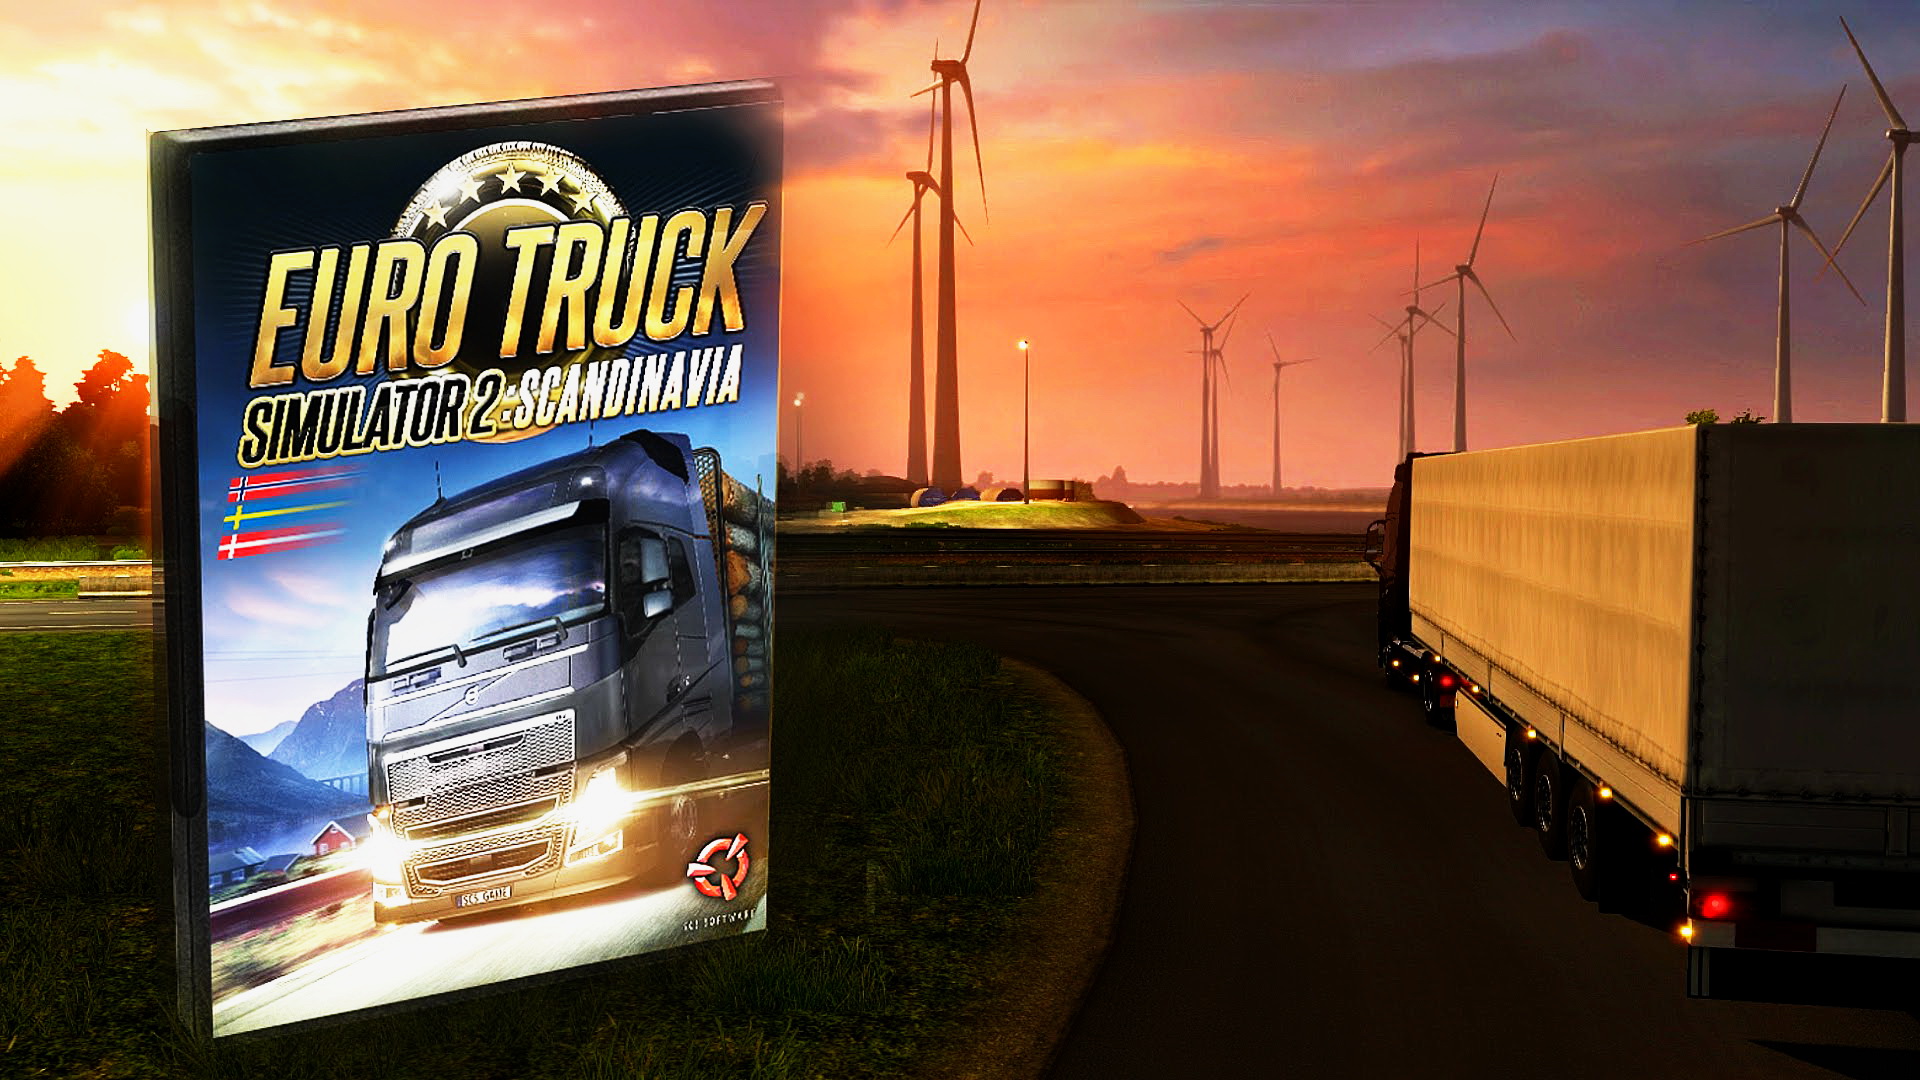 News about Scandinavia DLC + Pictures + Release Date for ETS 2